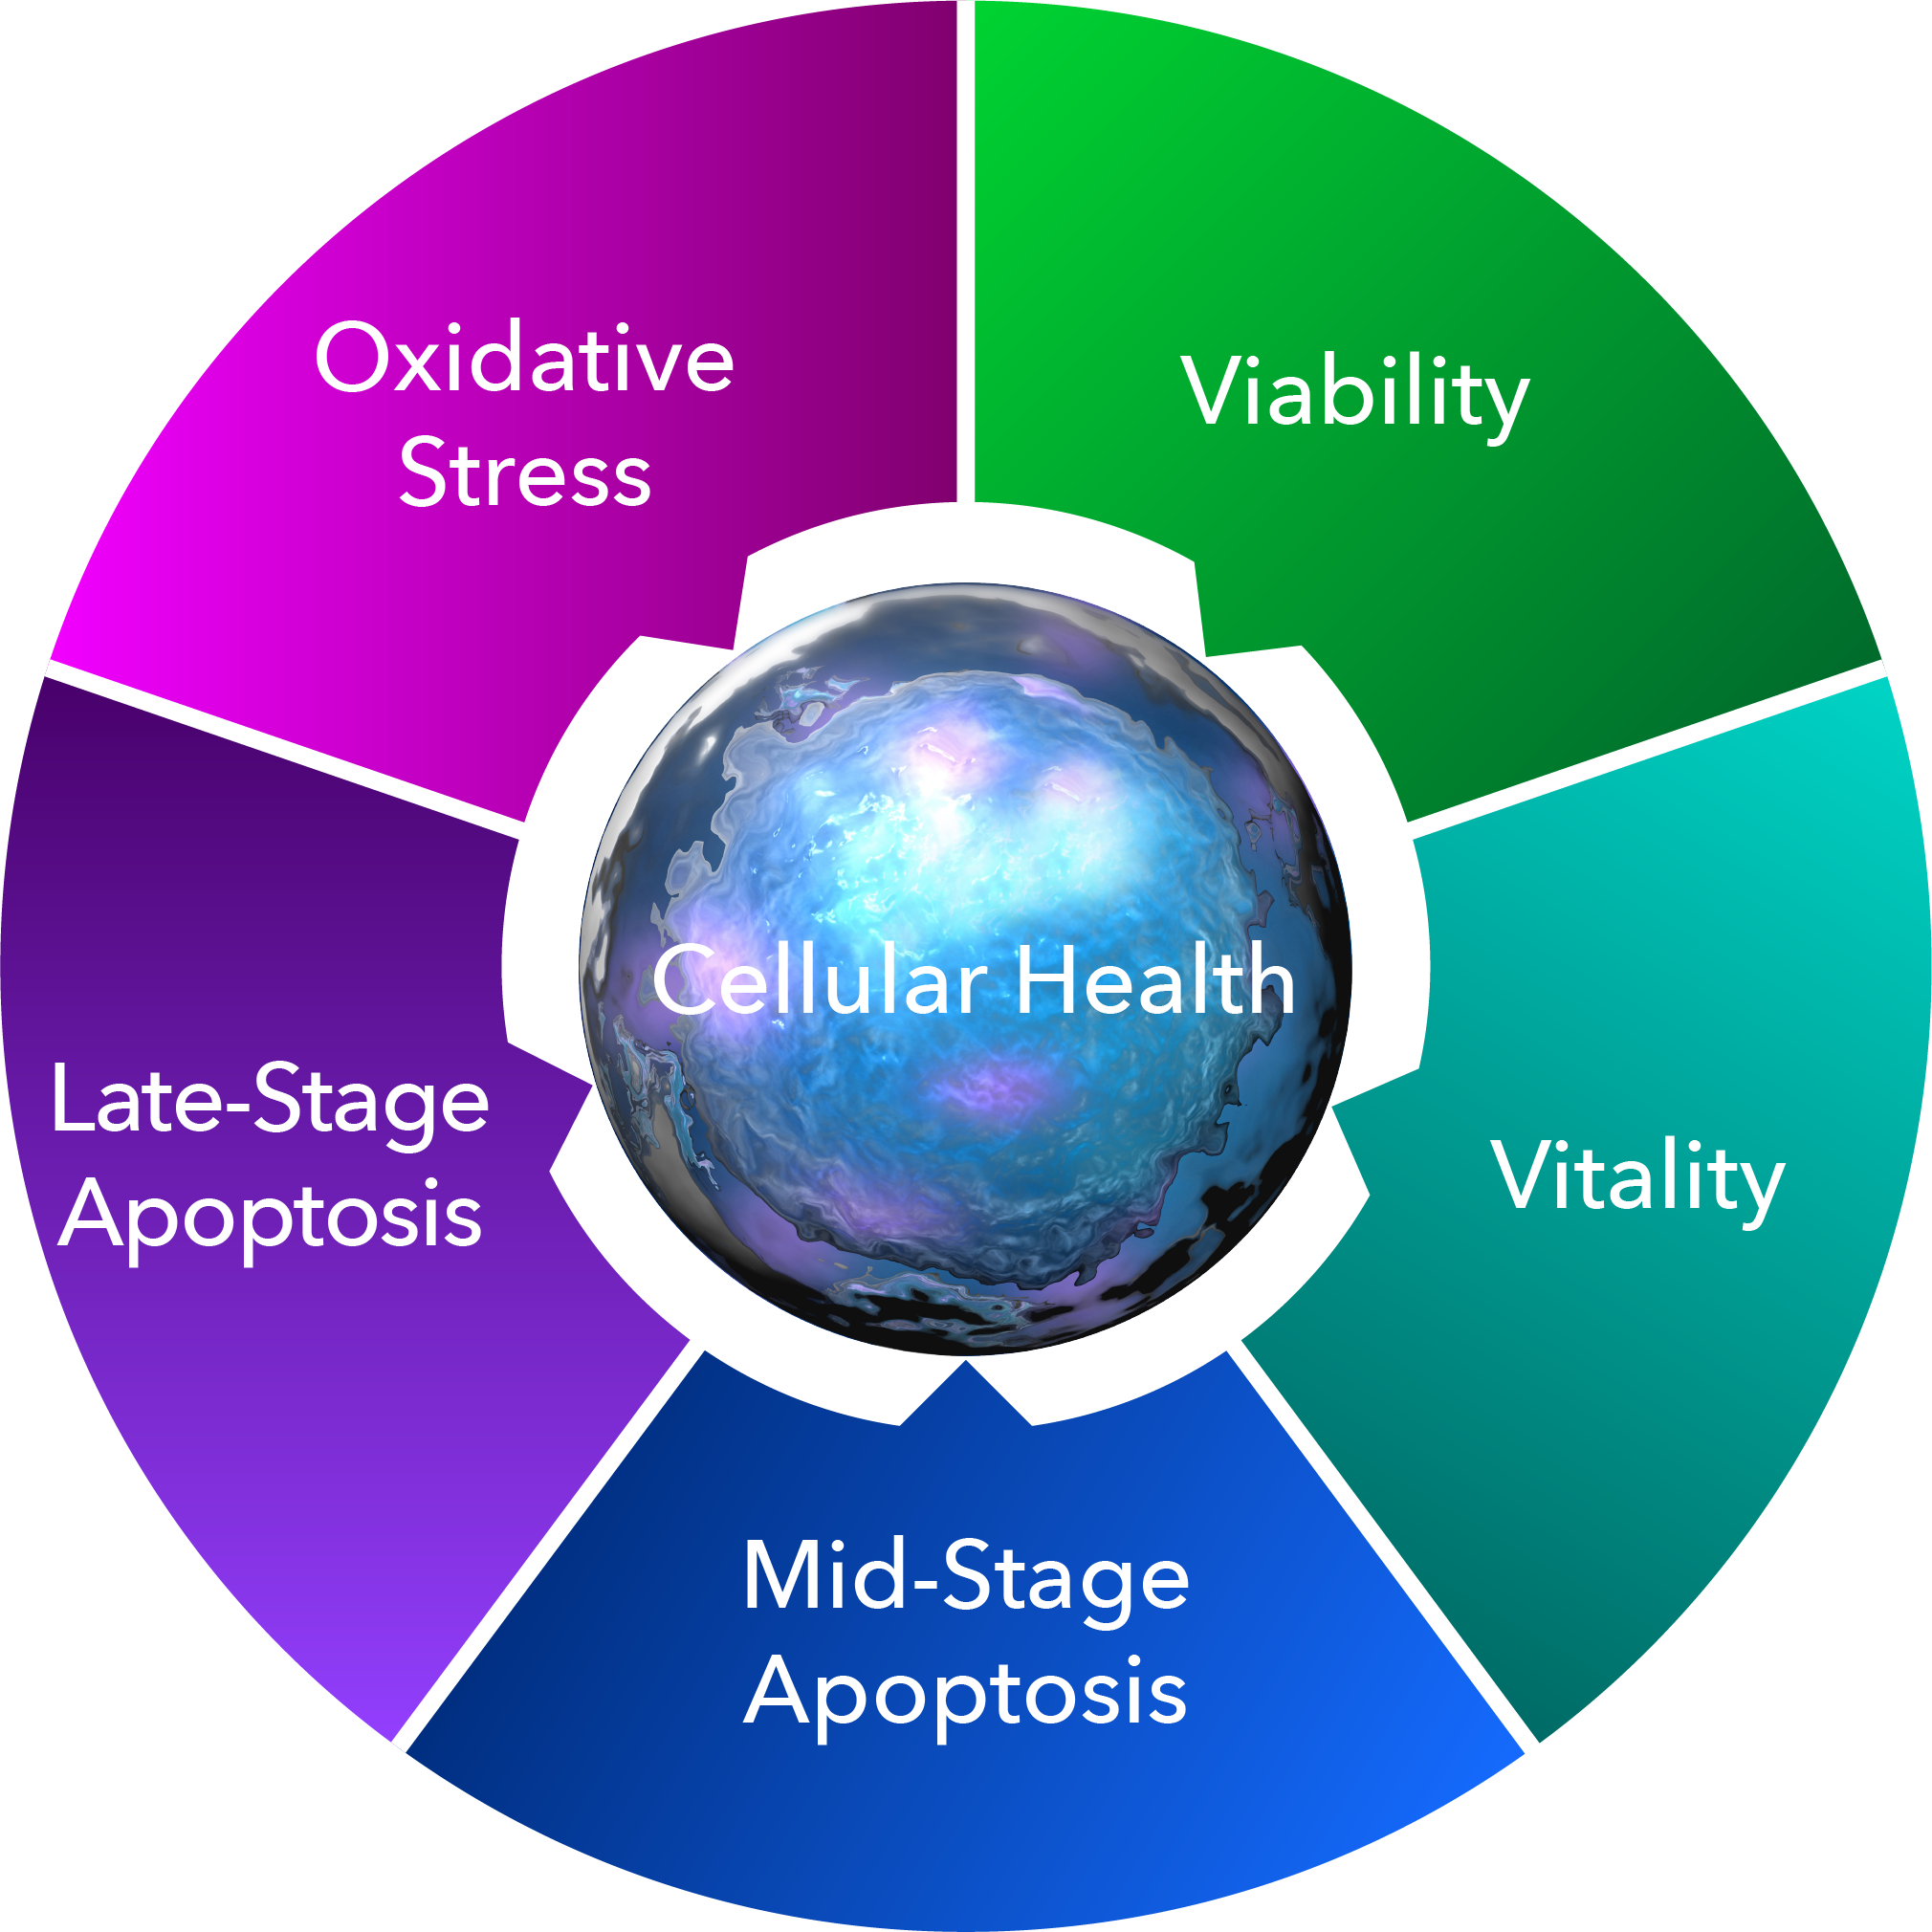 Image showing five measures of cell health - viability, vitality, mid and late-stage apoptosis, and reactive oxidative stress.